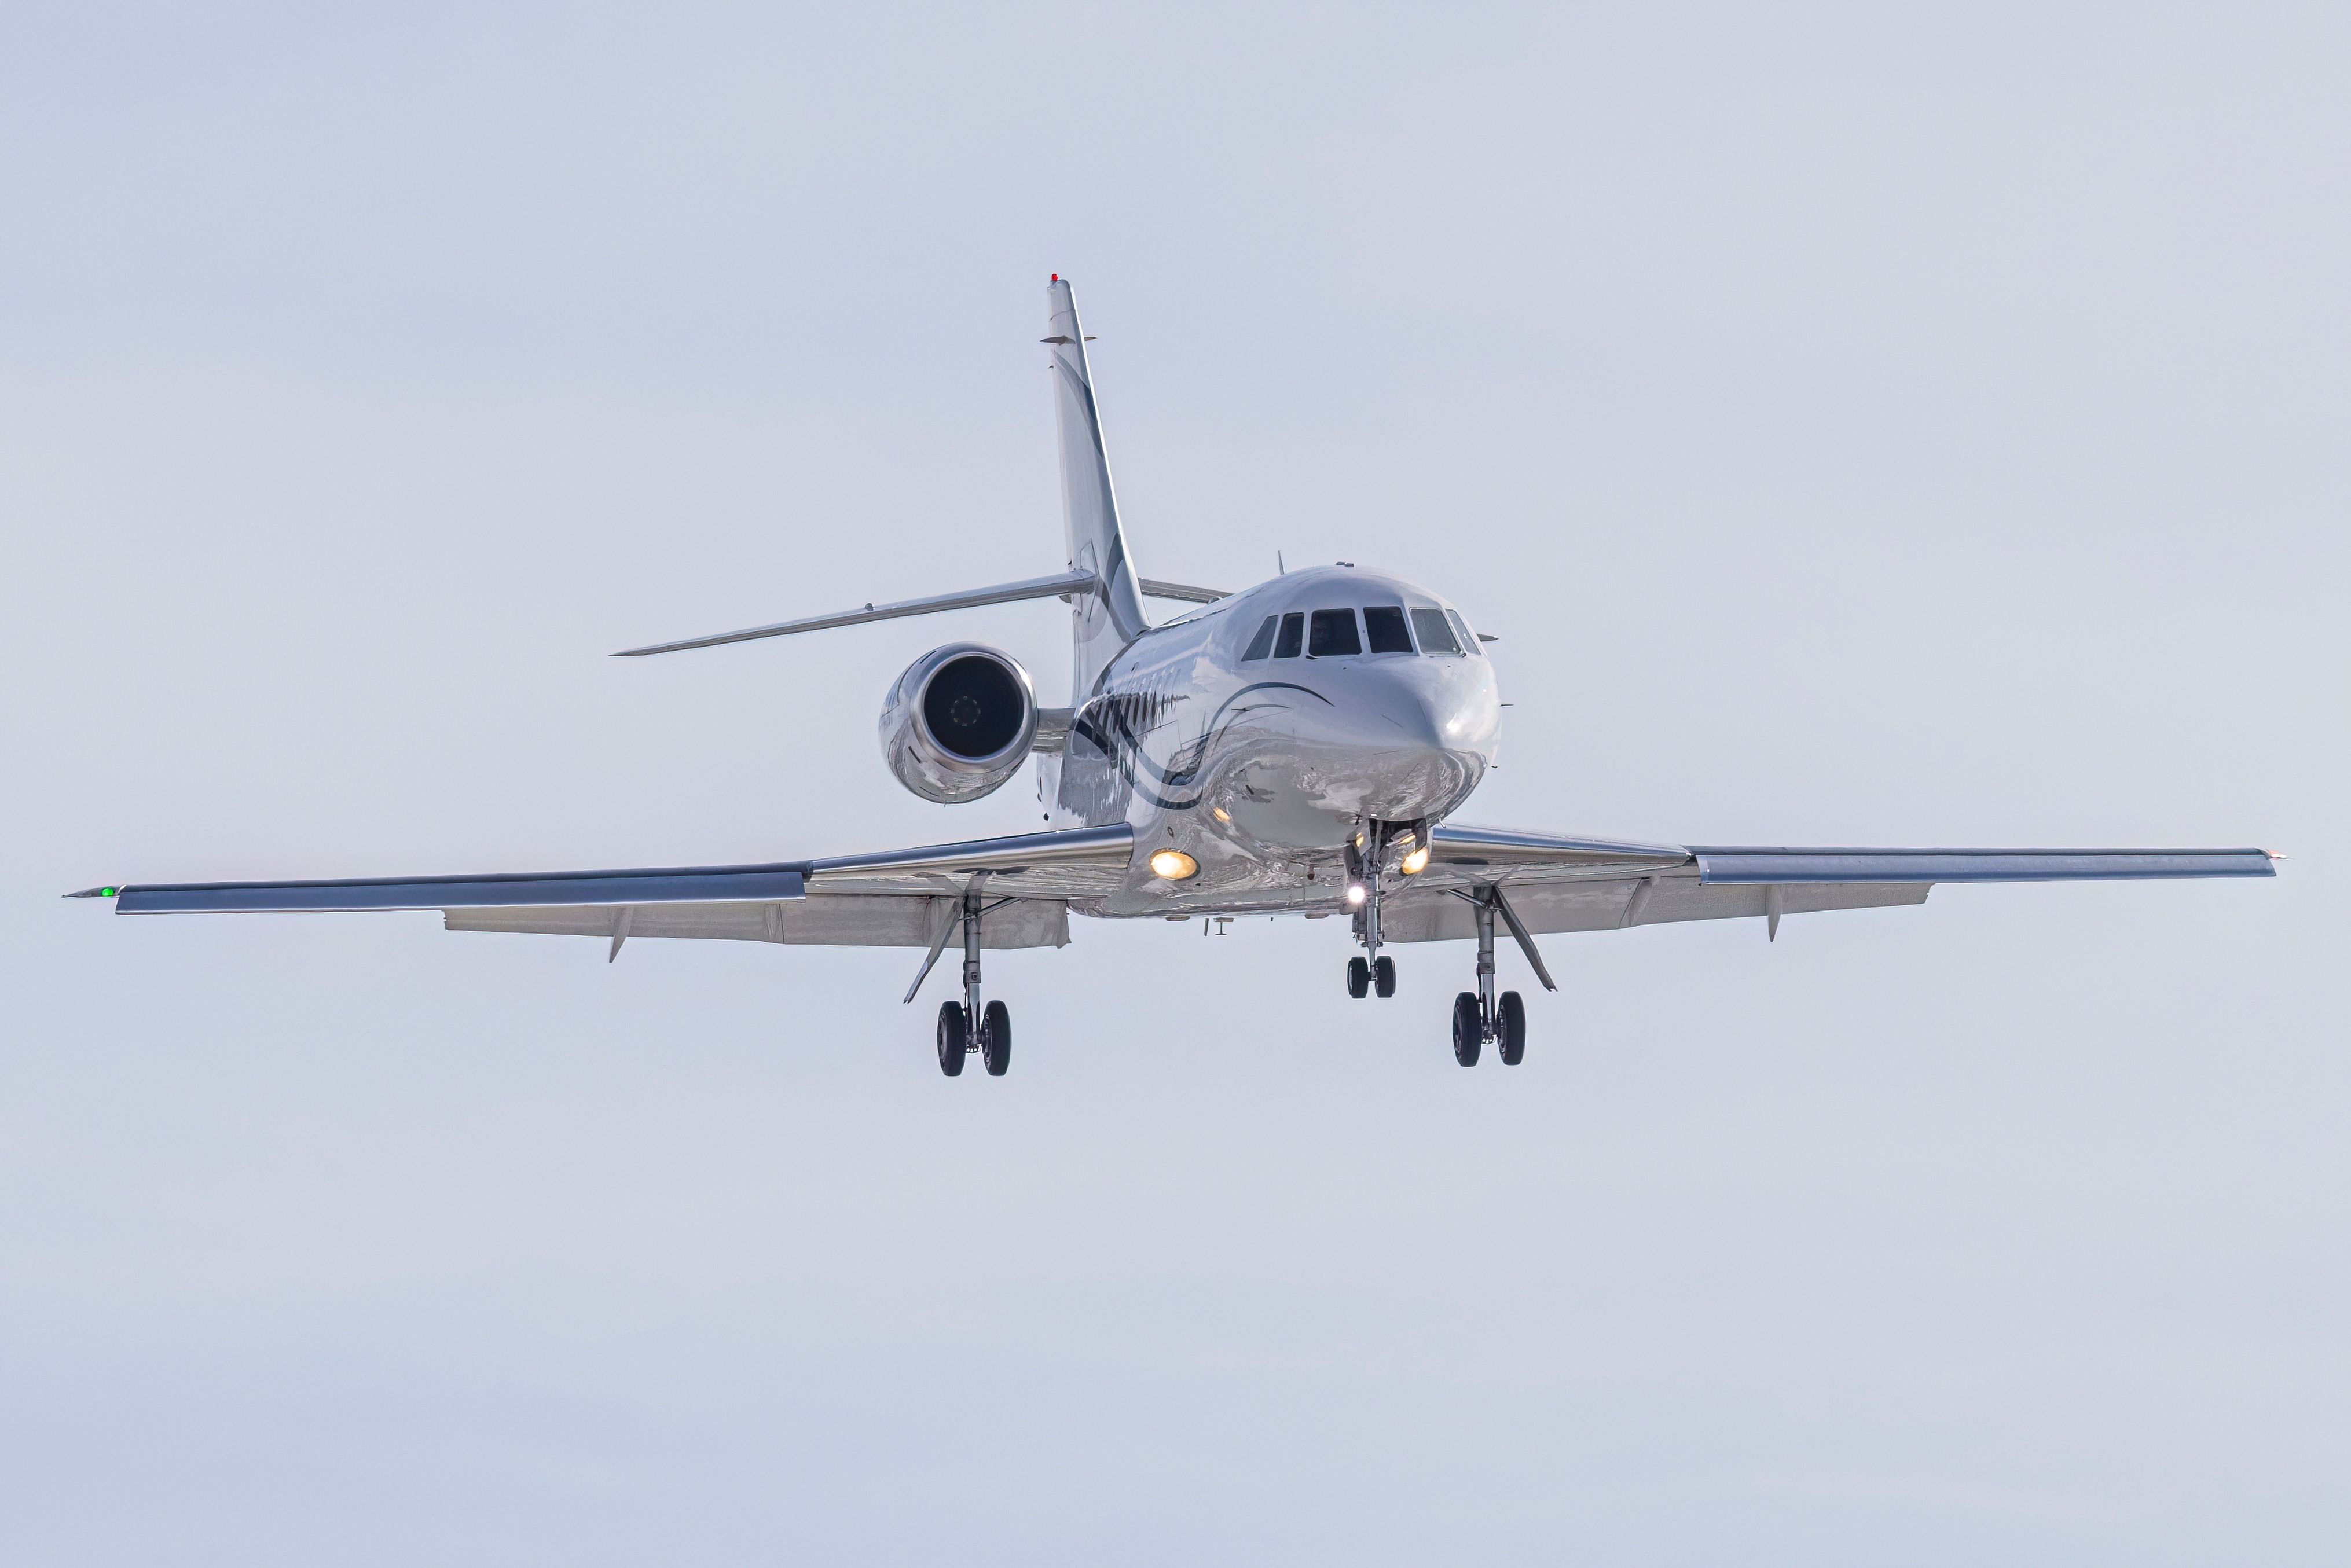 A Dassault Falcon 2000XL flying in the sky.